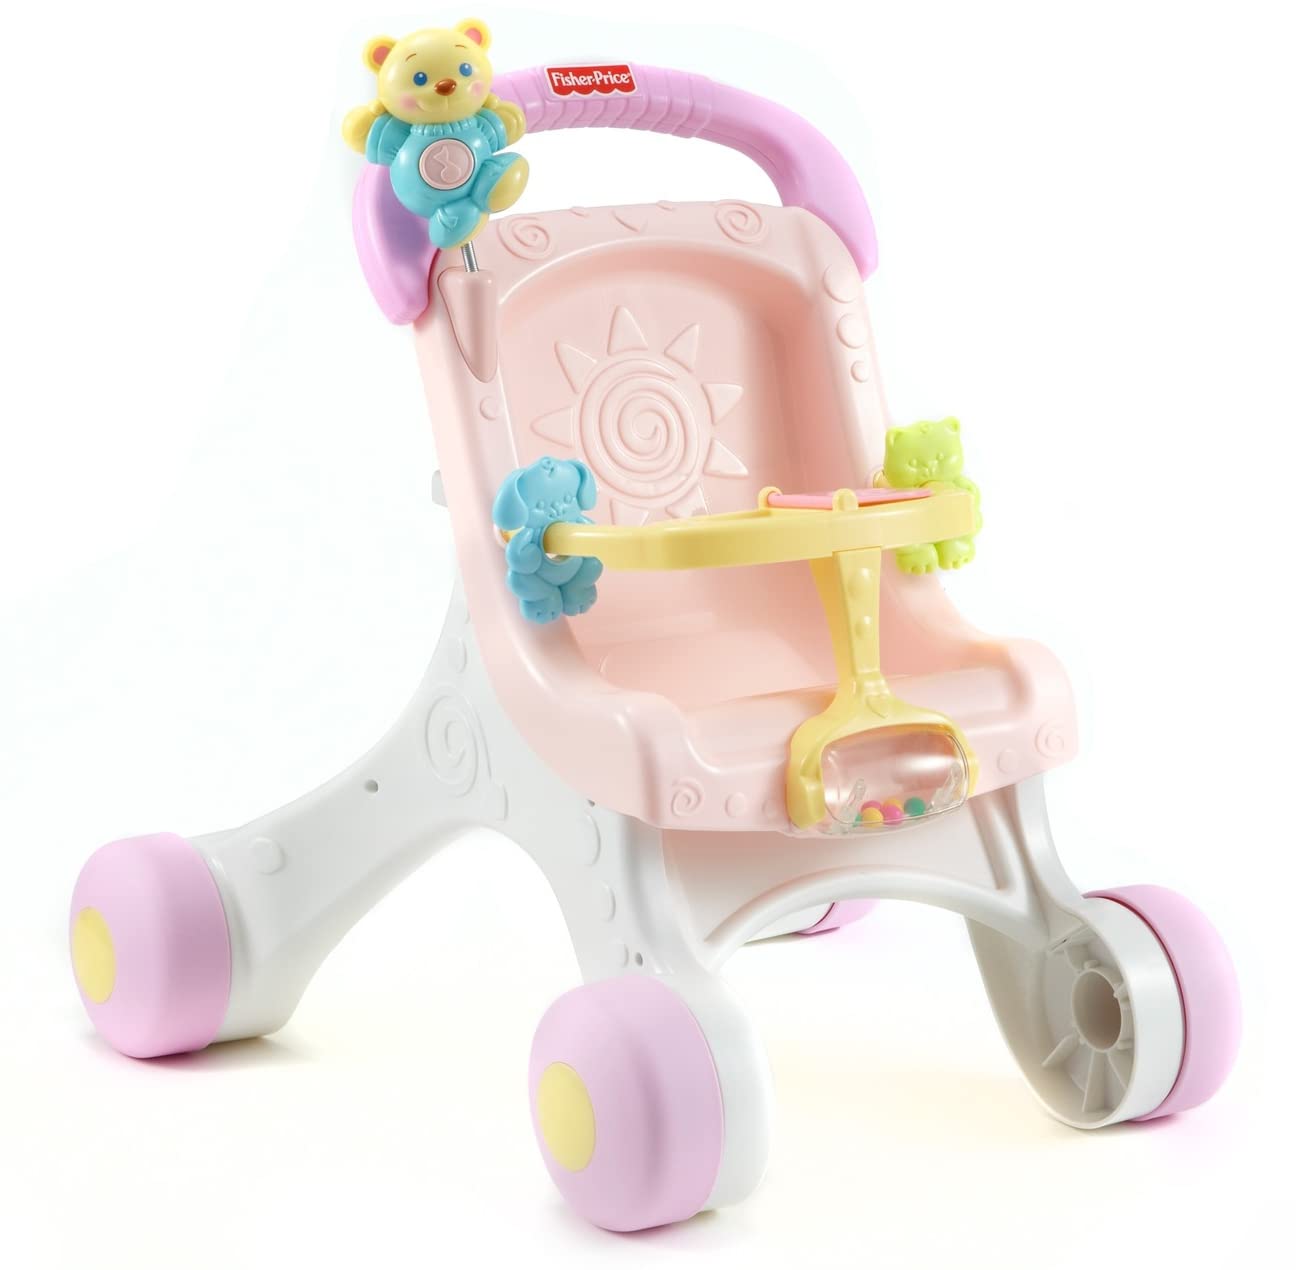 Fisher-Price Brilliant Basics Stroll-Along Walker, Standard Packaging, for 9 months and up